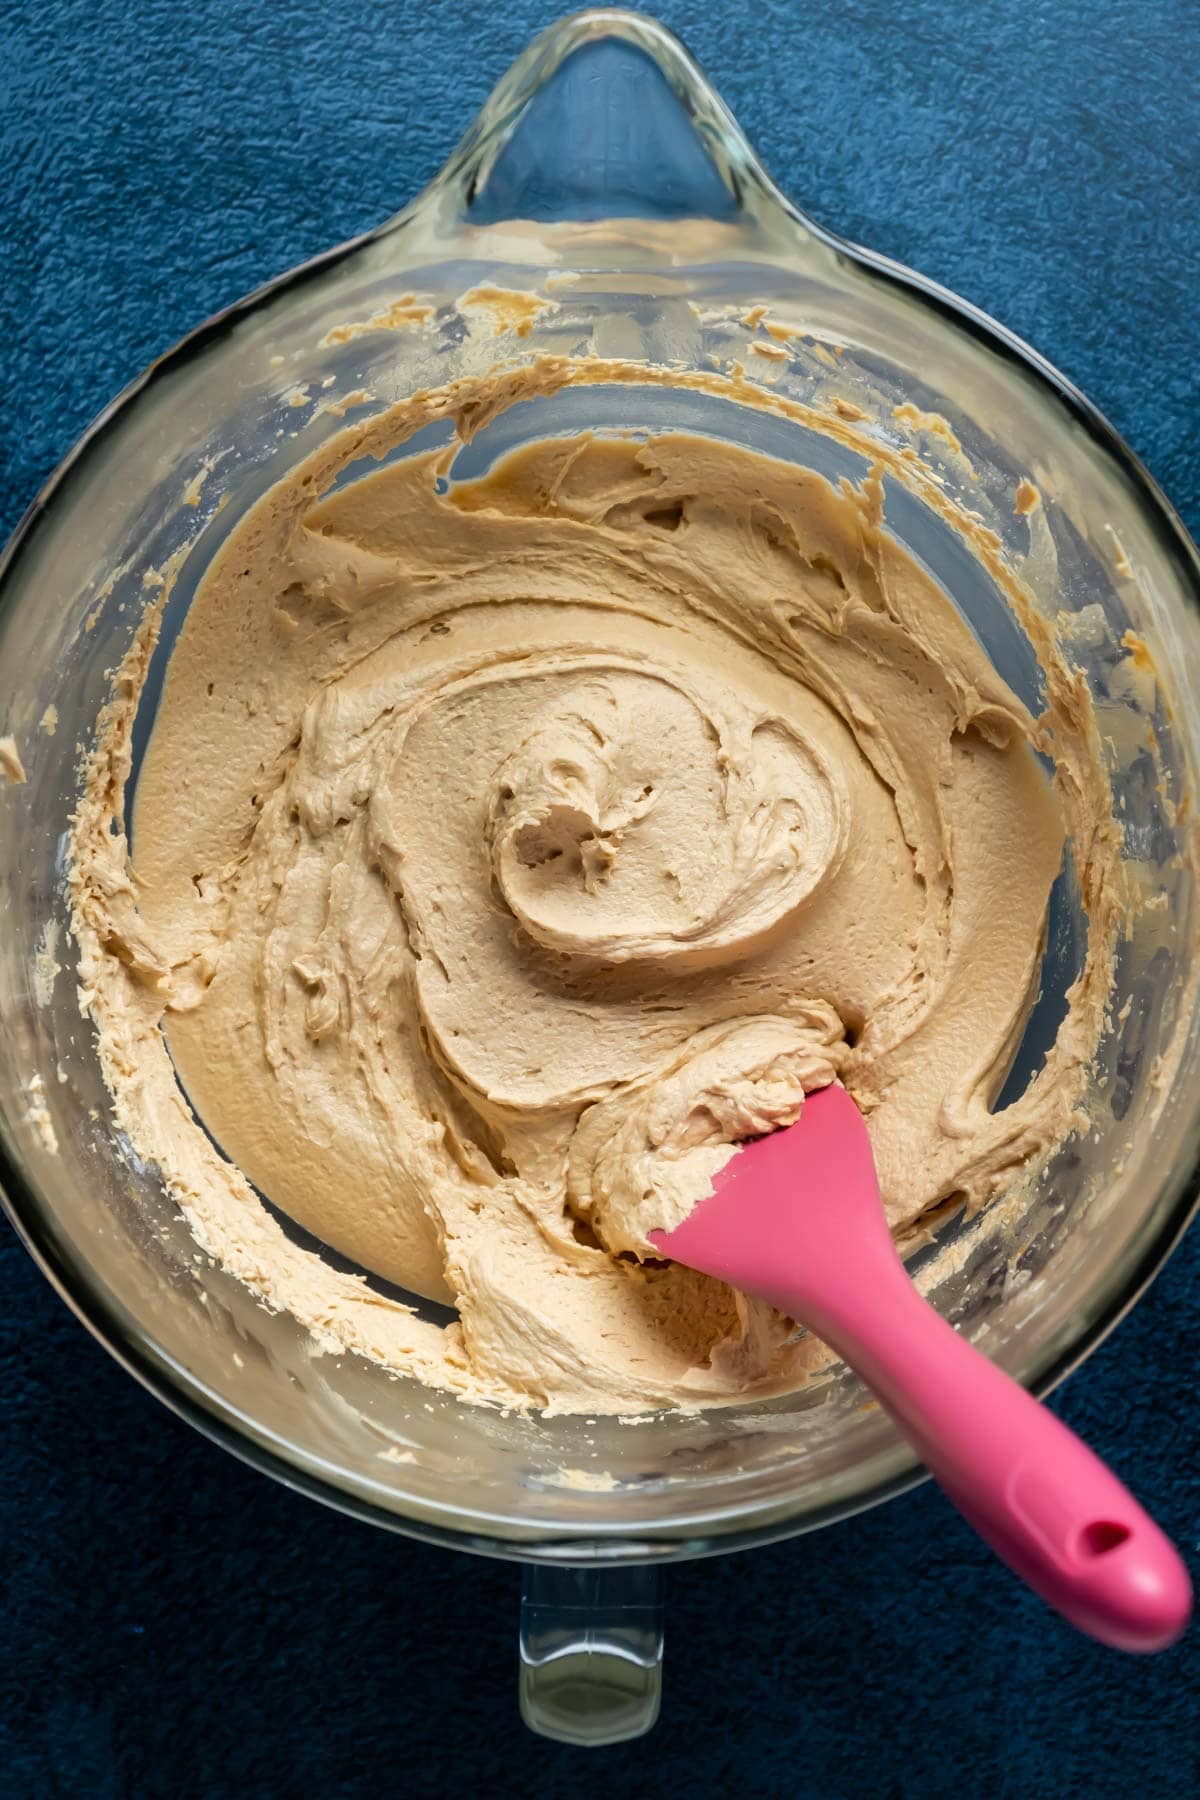 Biscoff buttercream frosting in a bowl with a pink spatula.